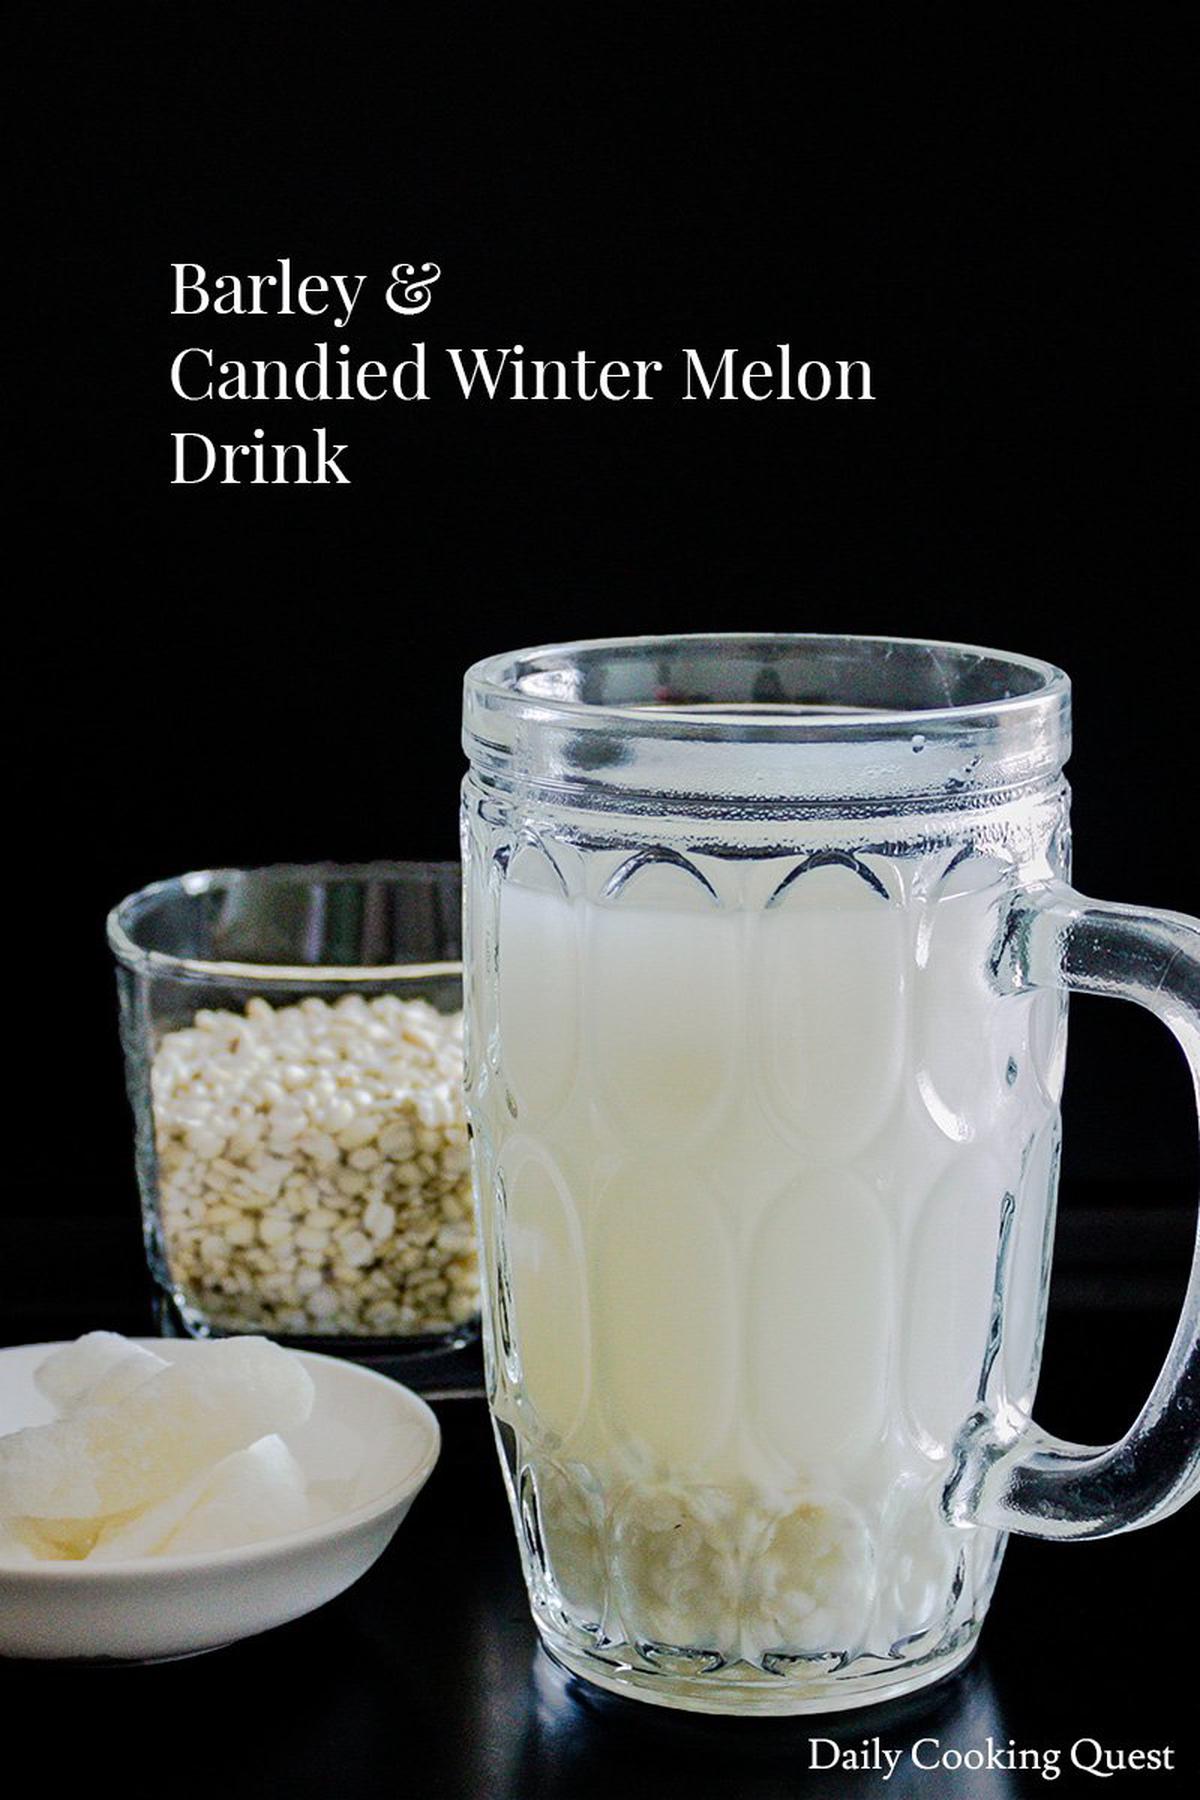 Barley and Candied Winter Melon Drink